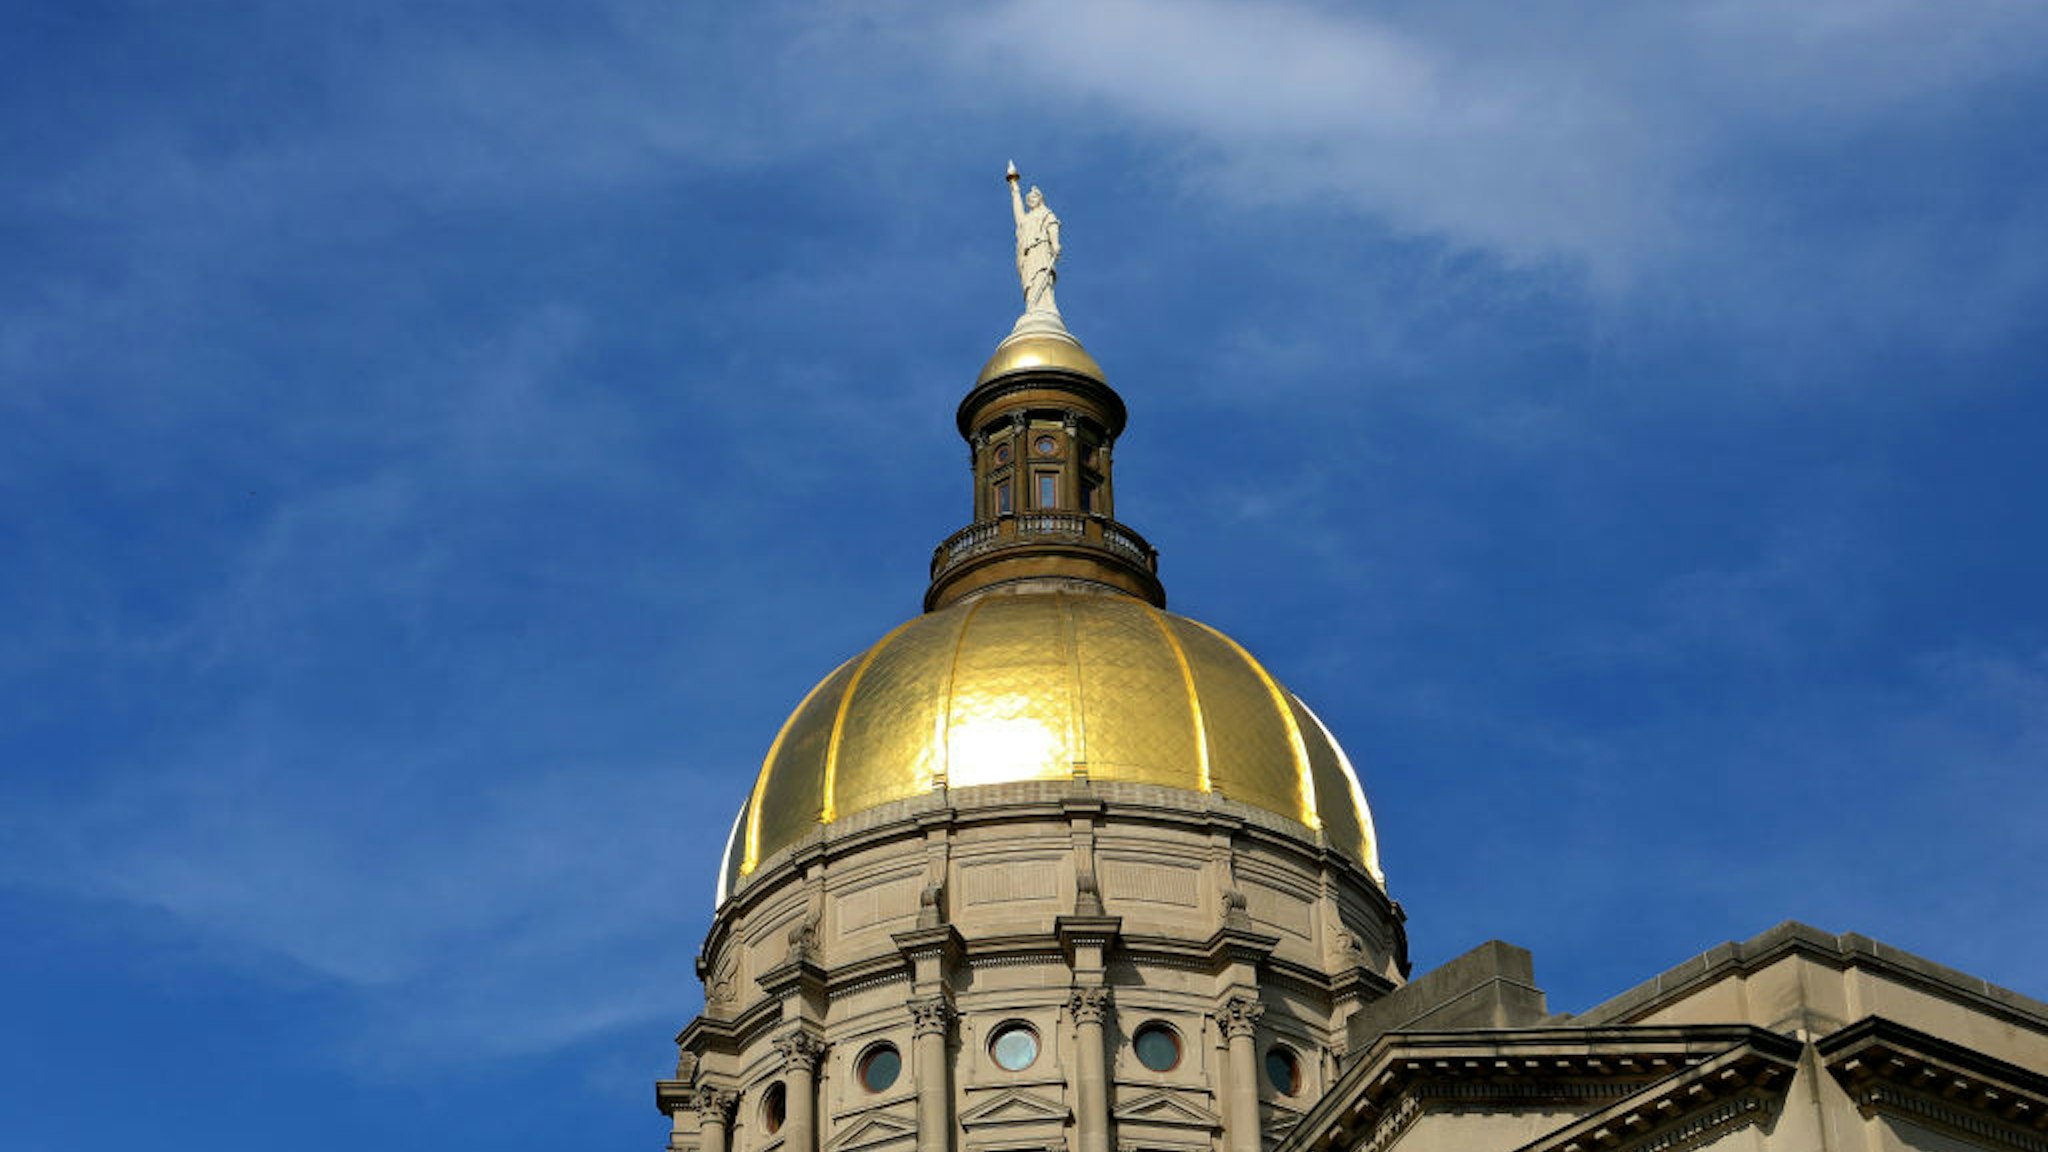 Statue of 'Miss Fredom' atop the Georgia State Capitol dome in Atlanta, Georgia on July 27, 2019.